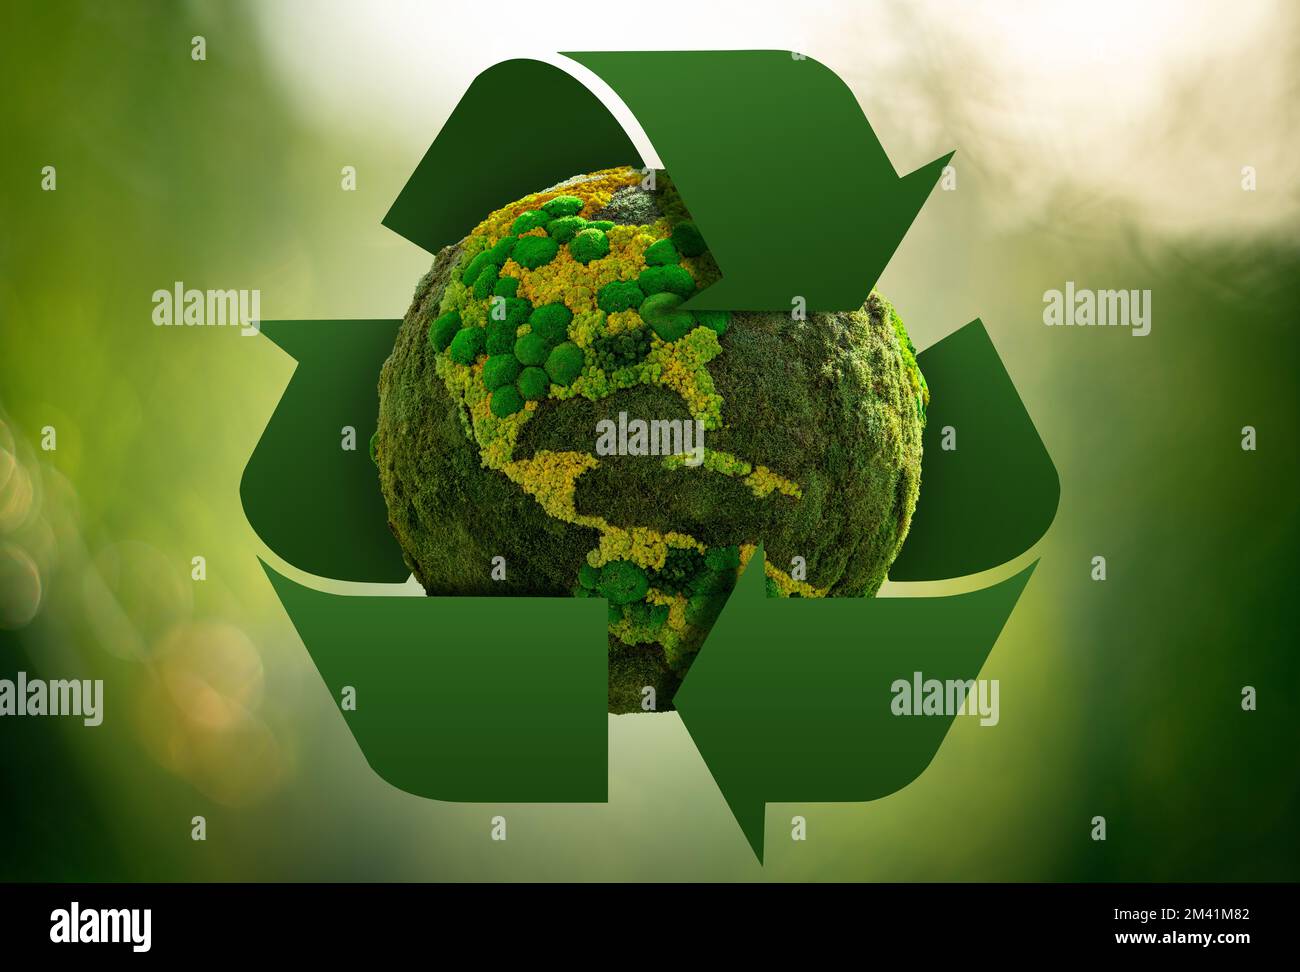 Green planet Earth with recycling symbol. Concept Stock Photo